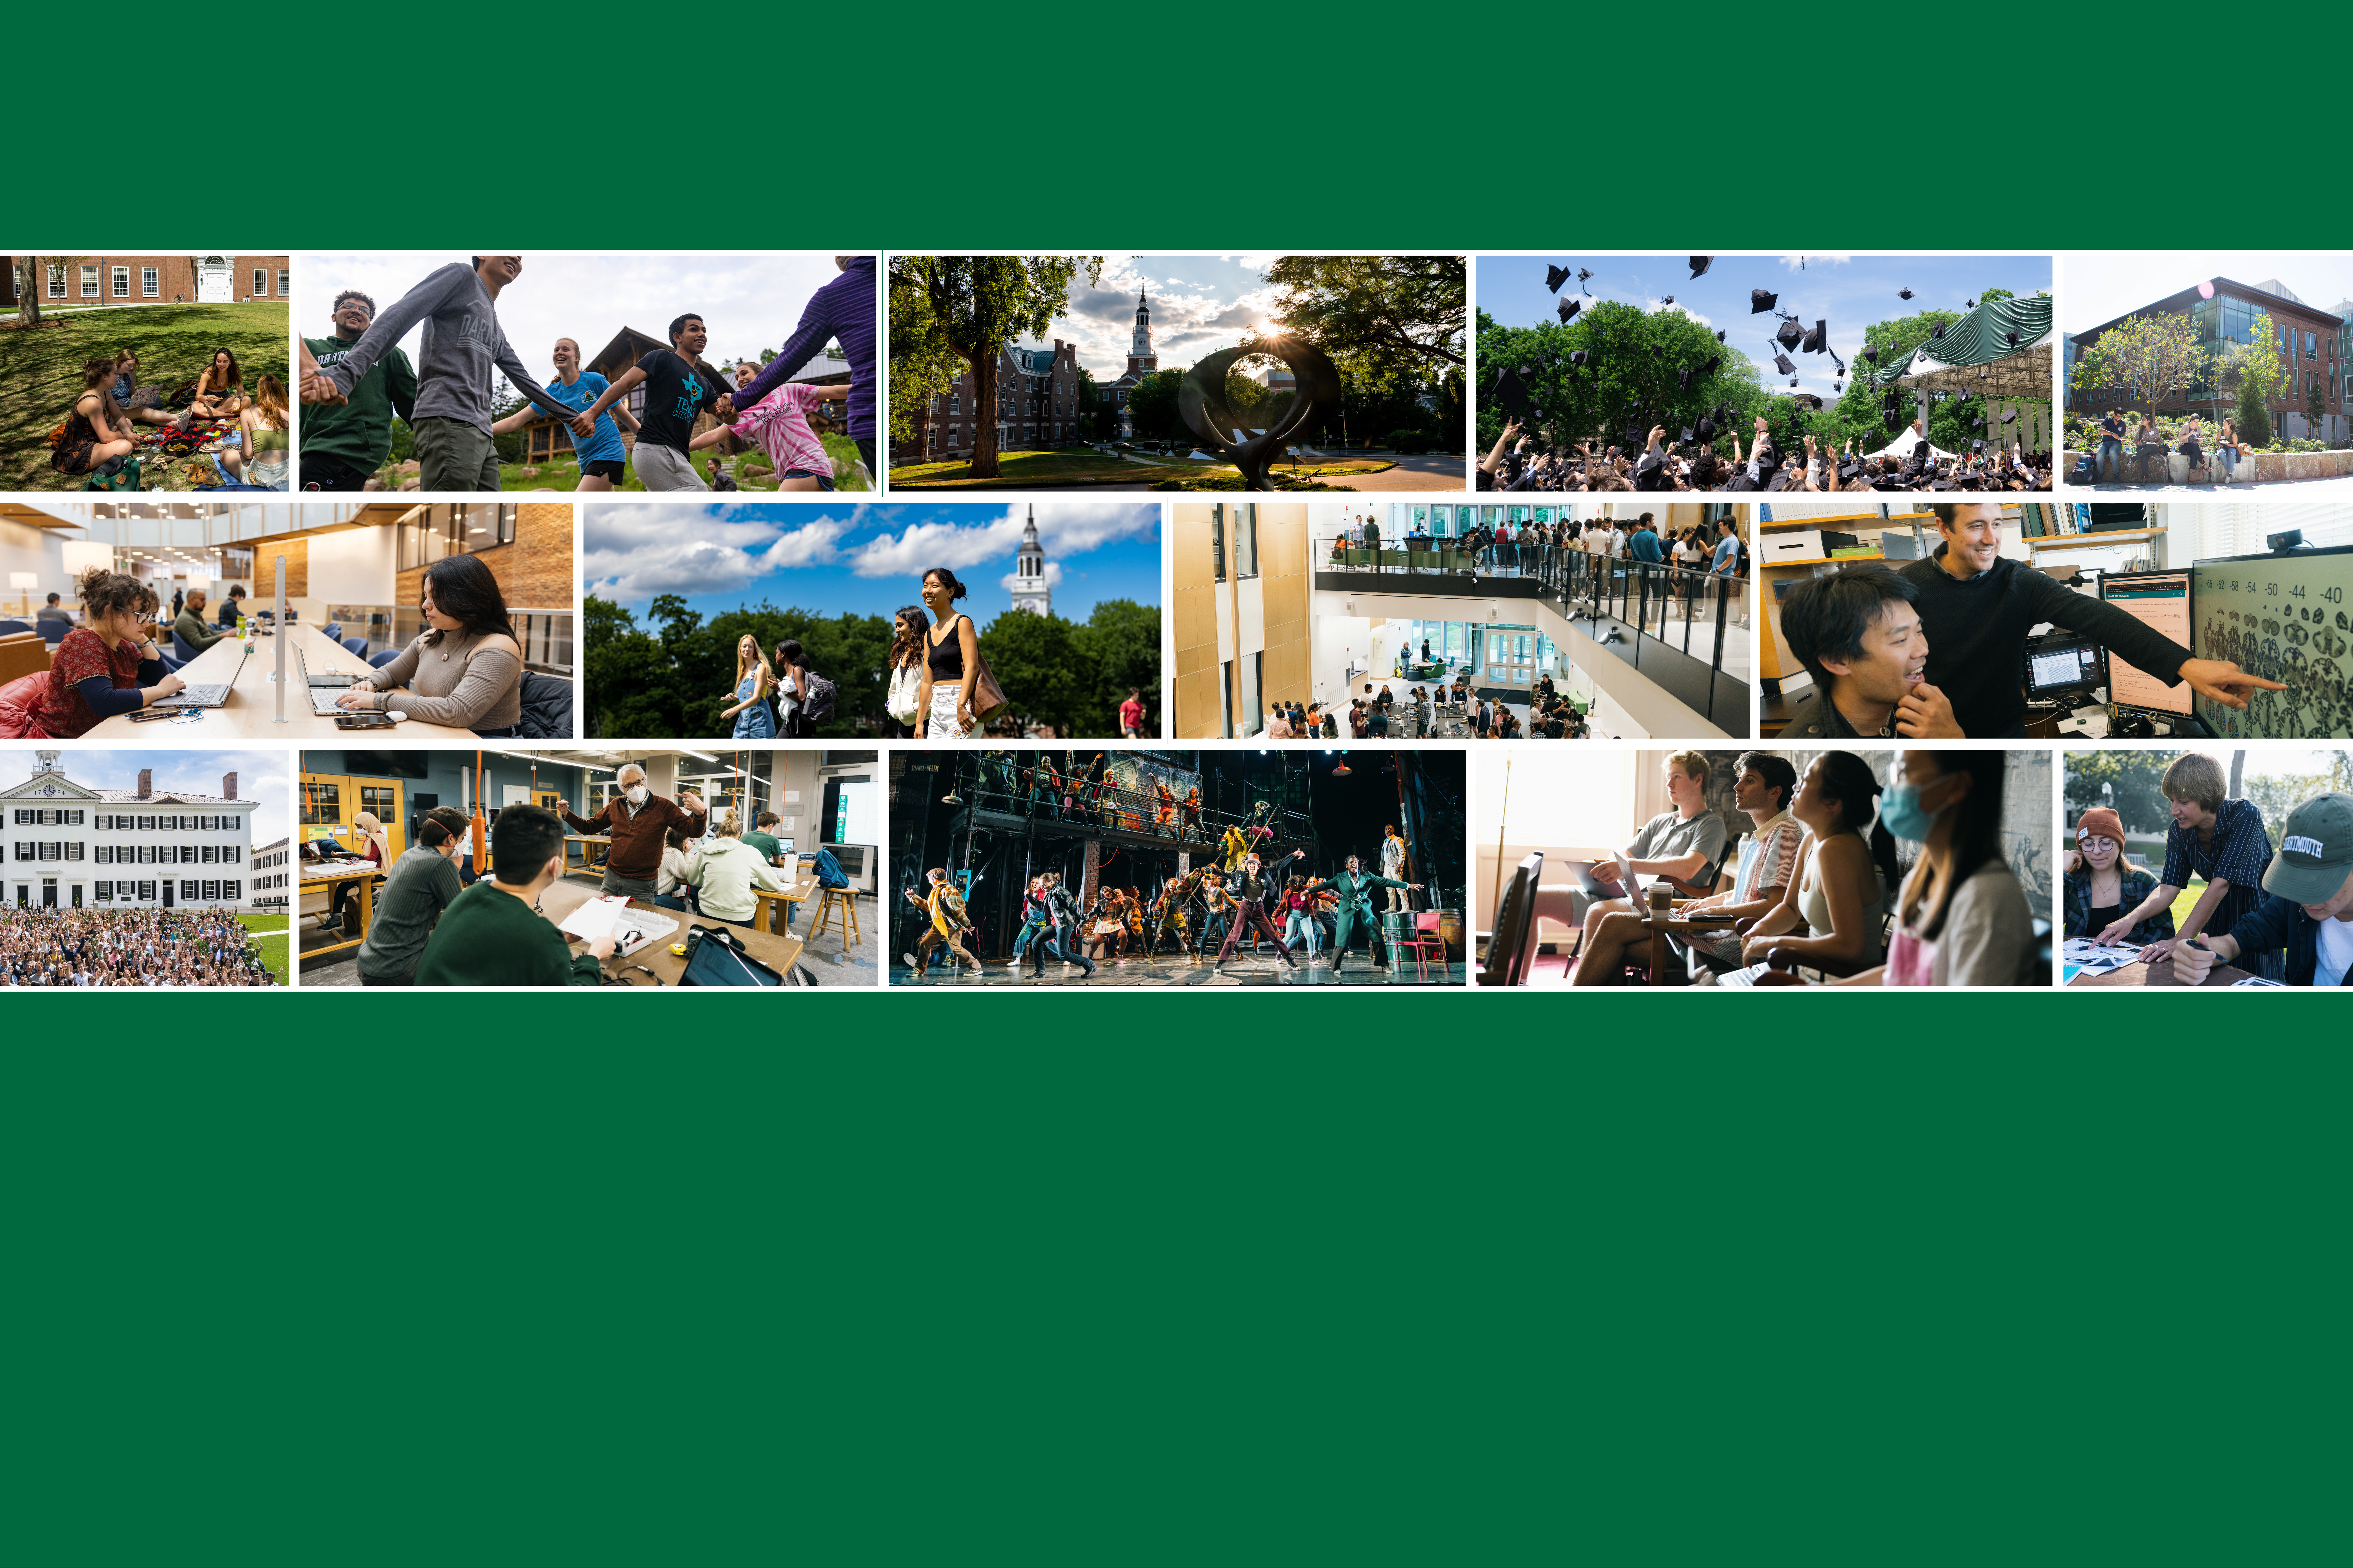 A collage of images depicting various aspects of student life at Dartmouth